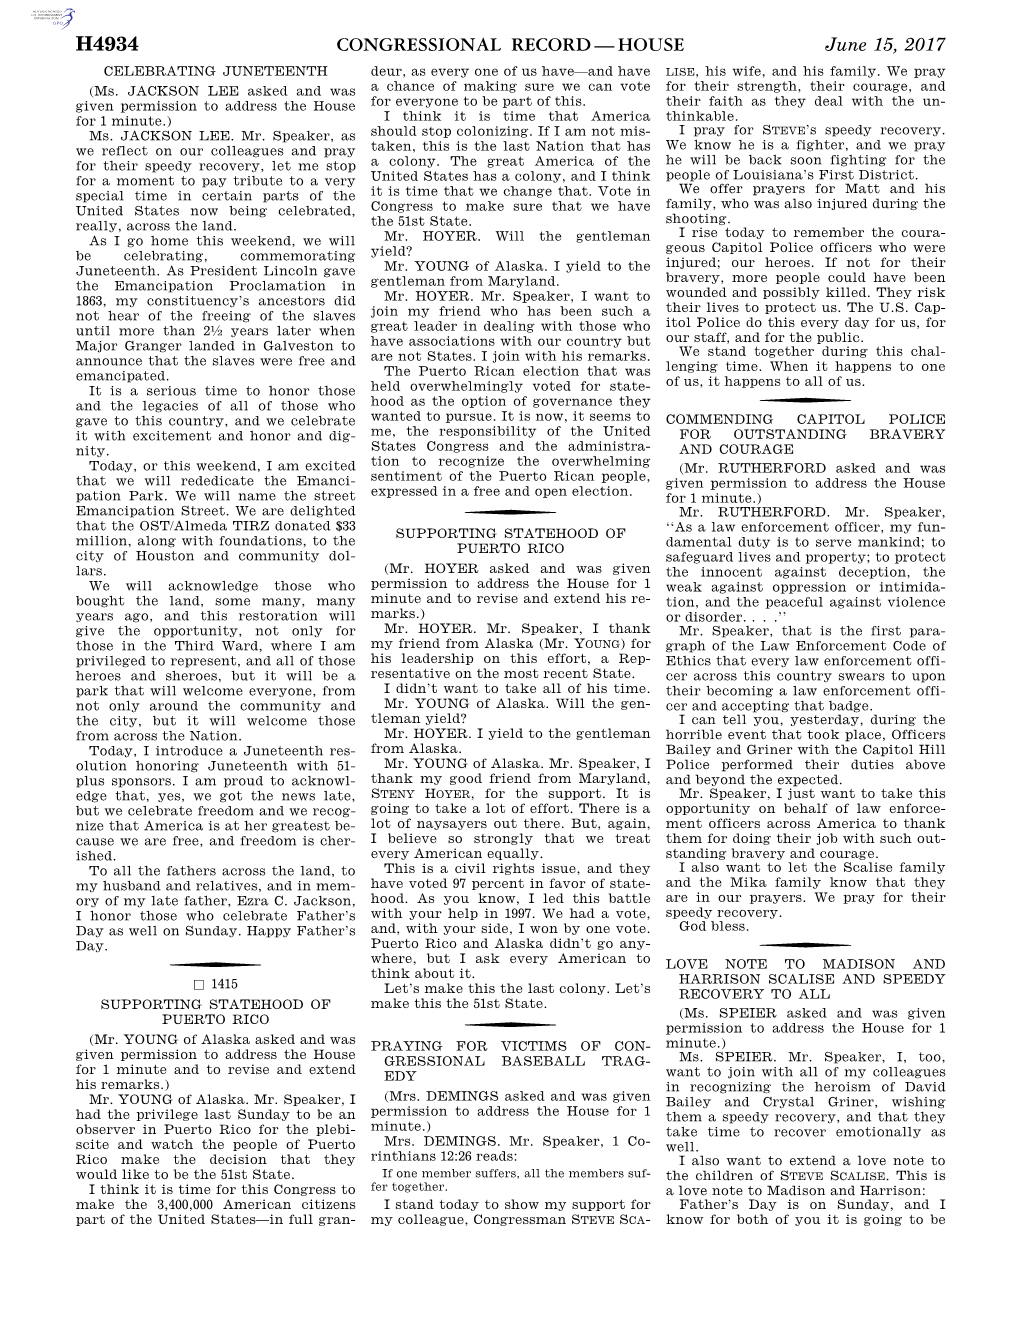 Congressional Record—House H4934